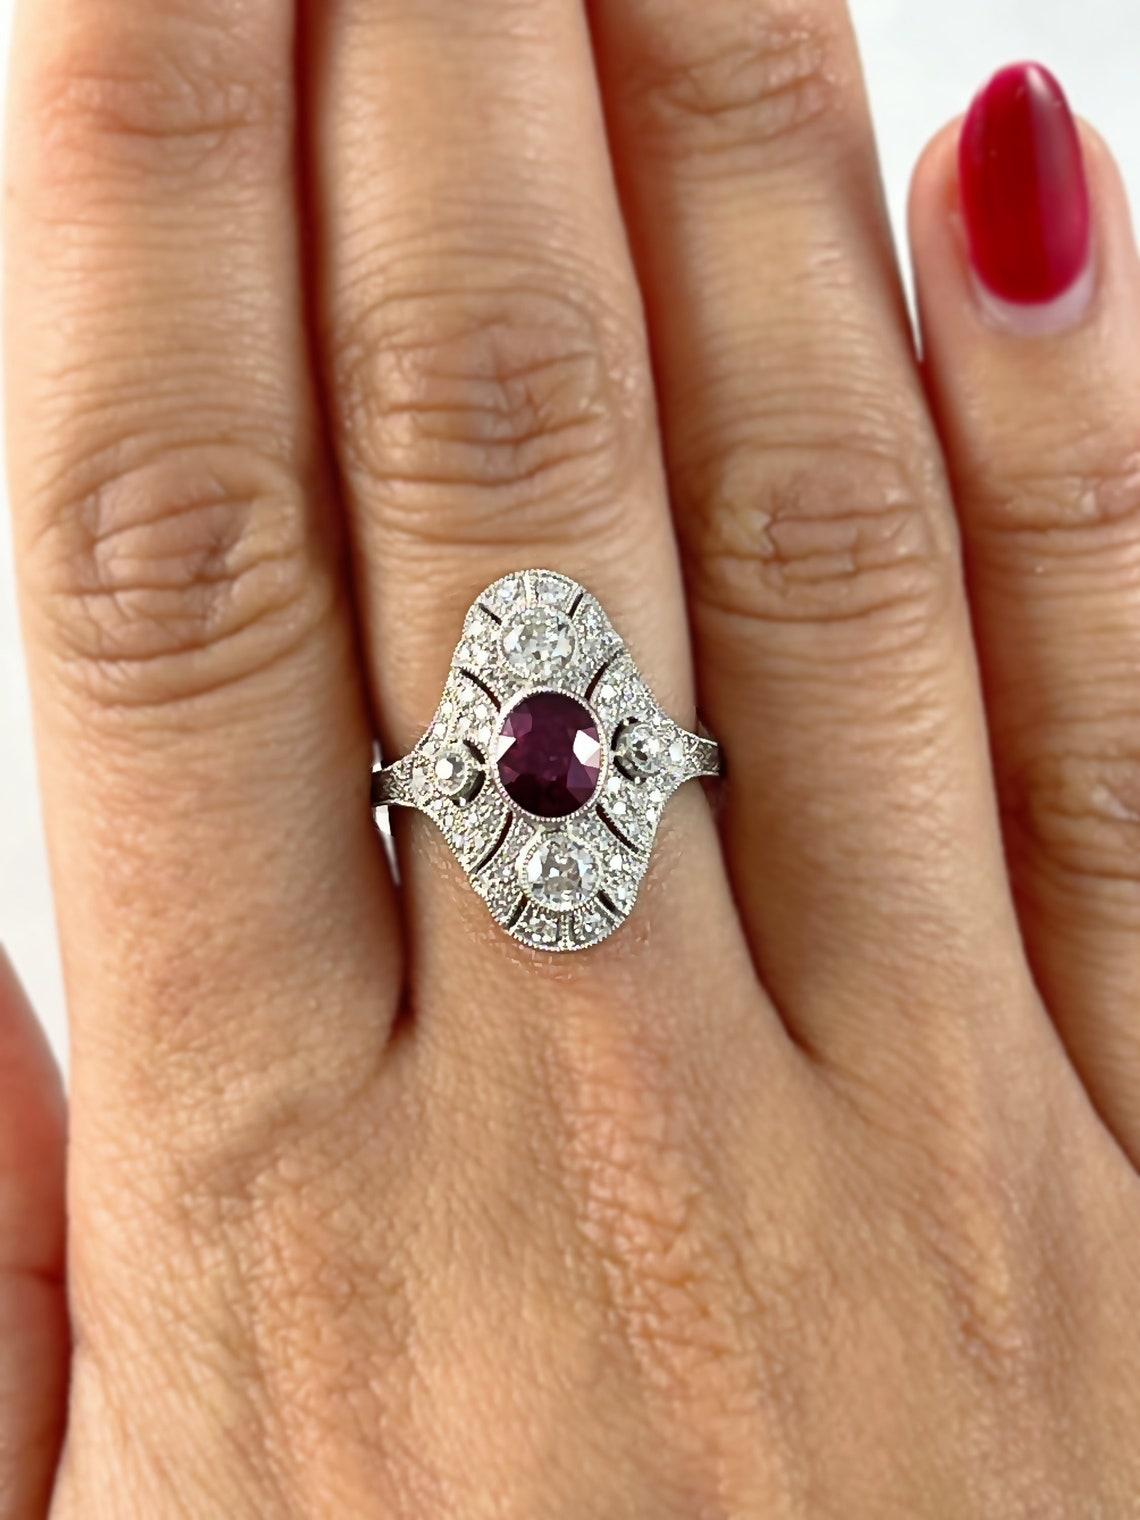 ruby engagement rings meaning